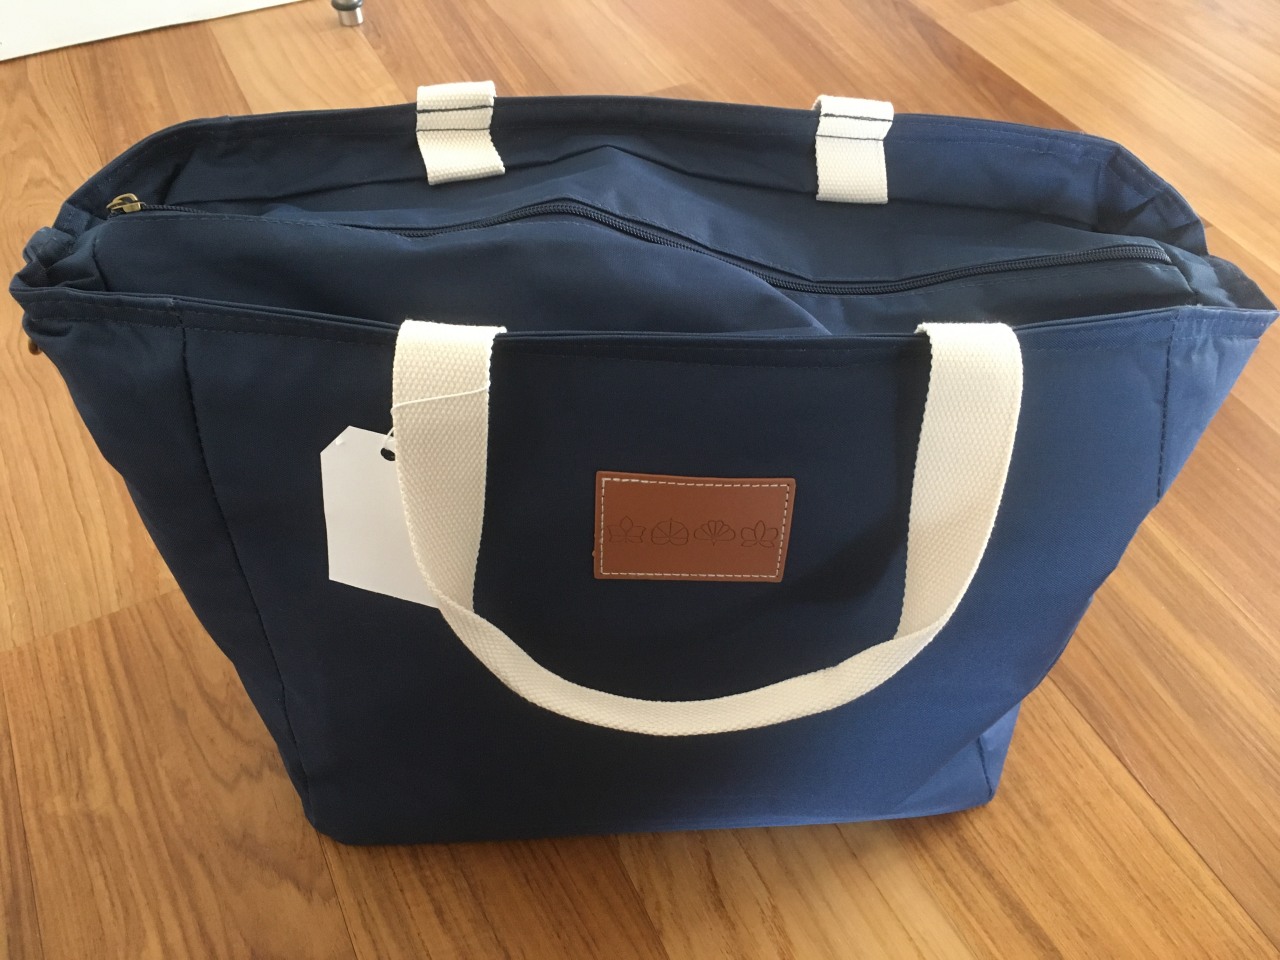 Eleven Madison Park at Home Tote Bag